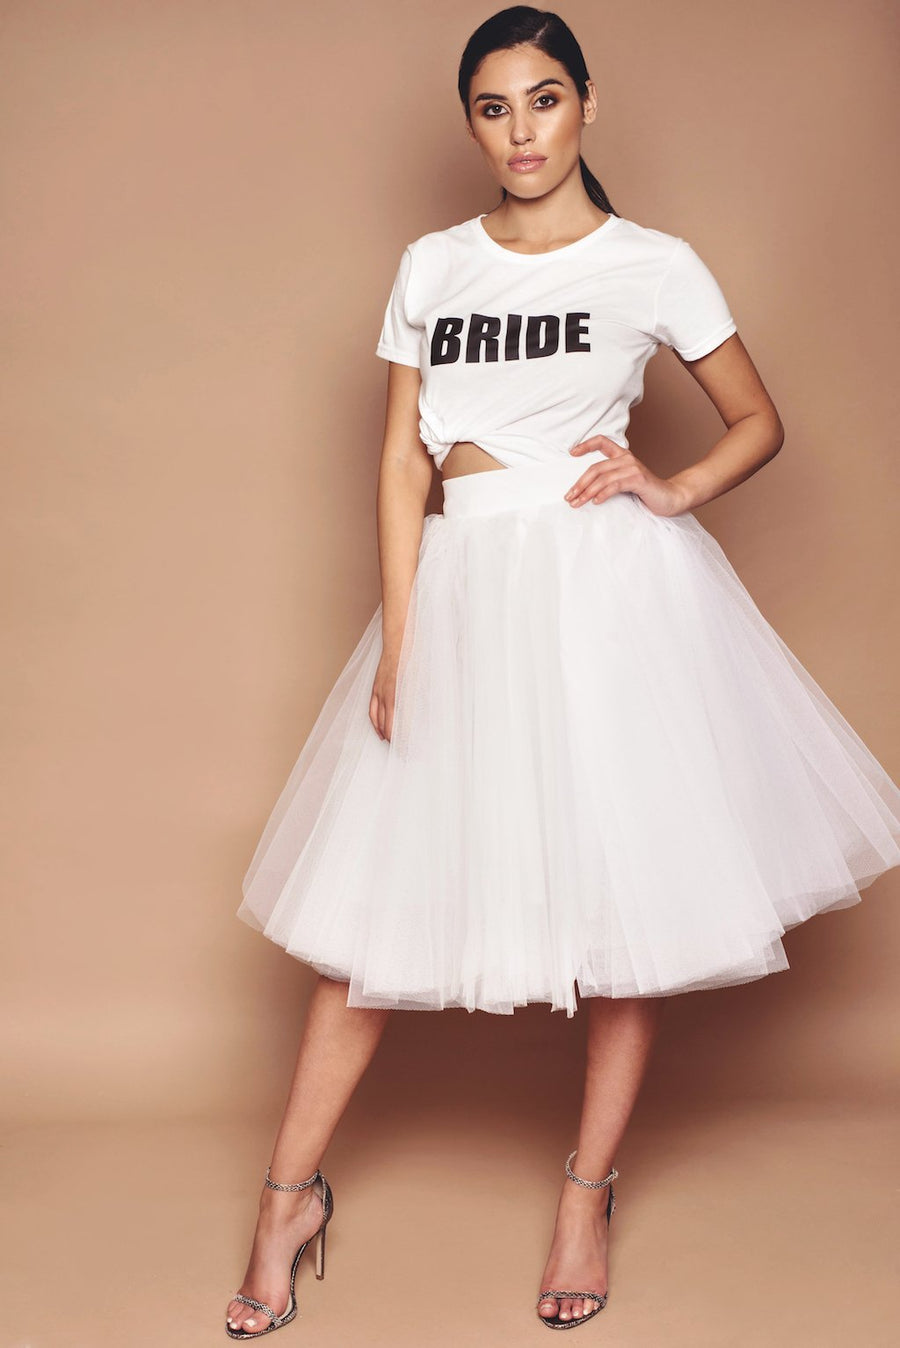 Bride T-Shirt and Tulle Skirt Set